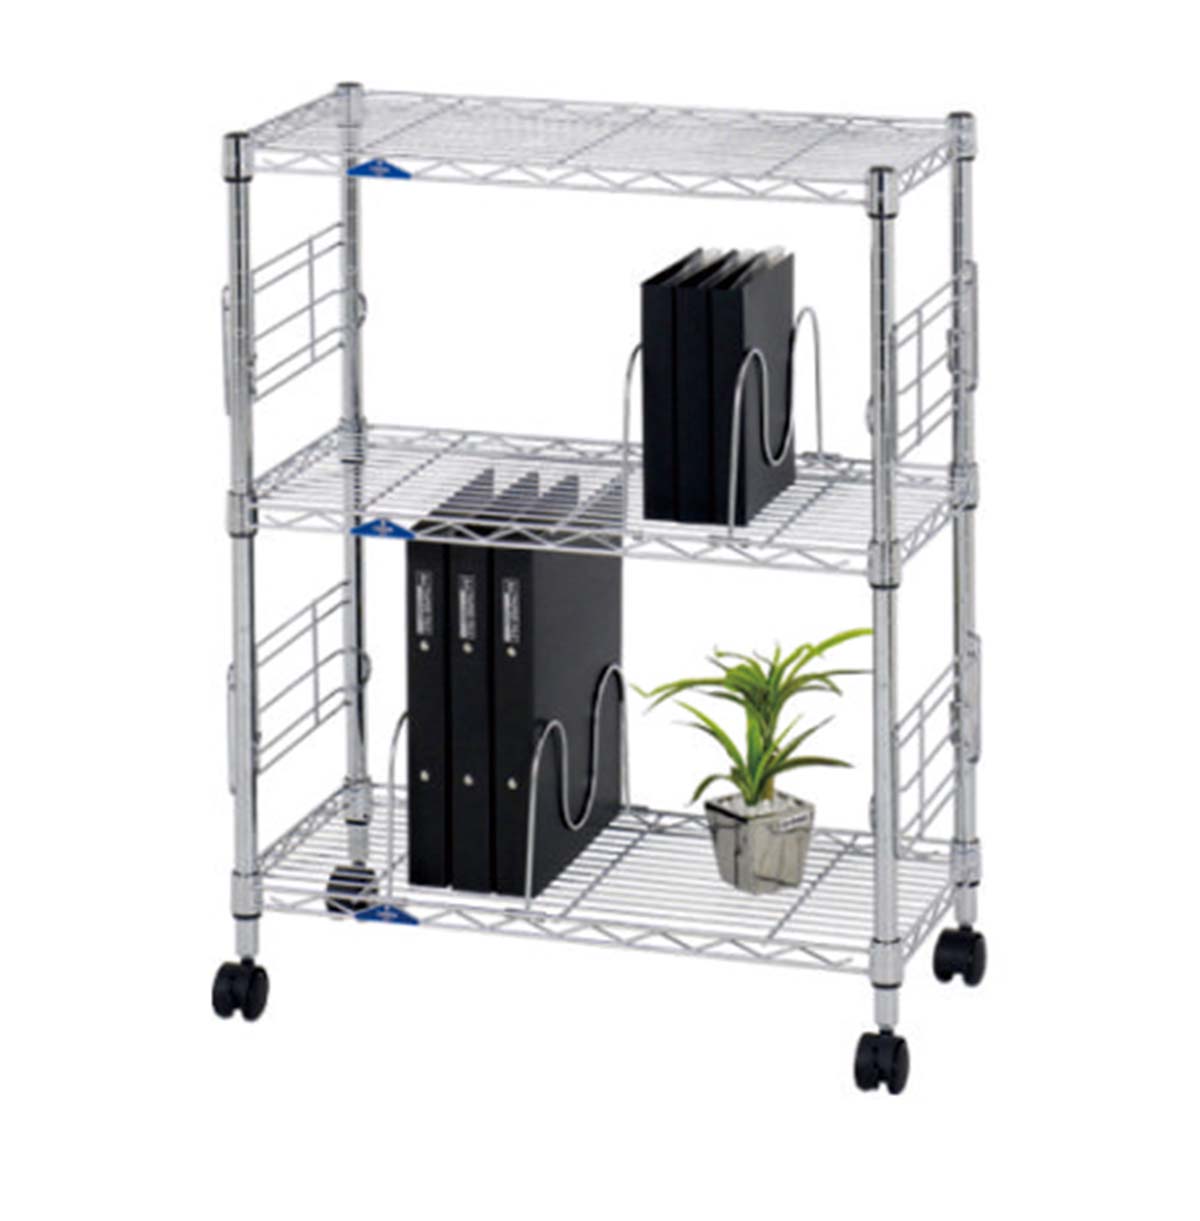 1-Tier ~ 7-Tier Office Storage Wire Shelving Unit / Shelving Storage Units on Wheels / Adjustable He